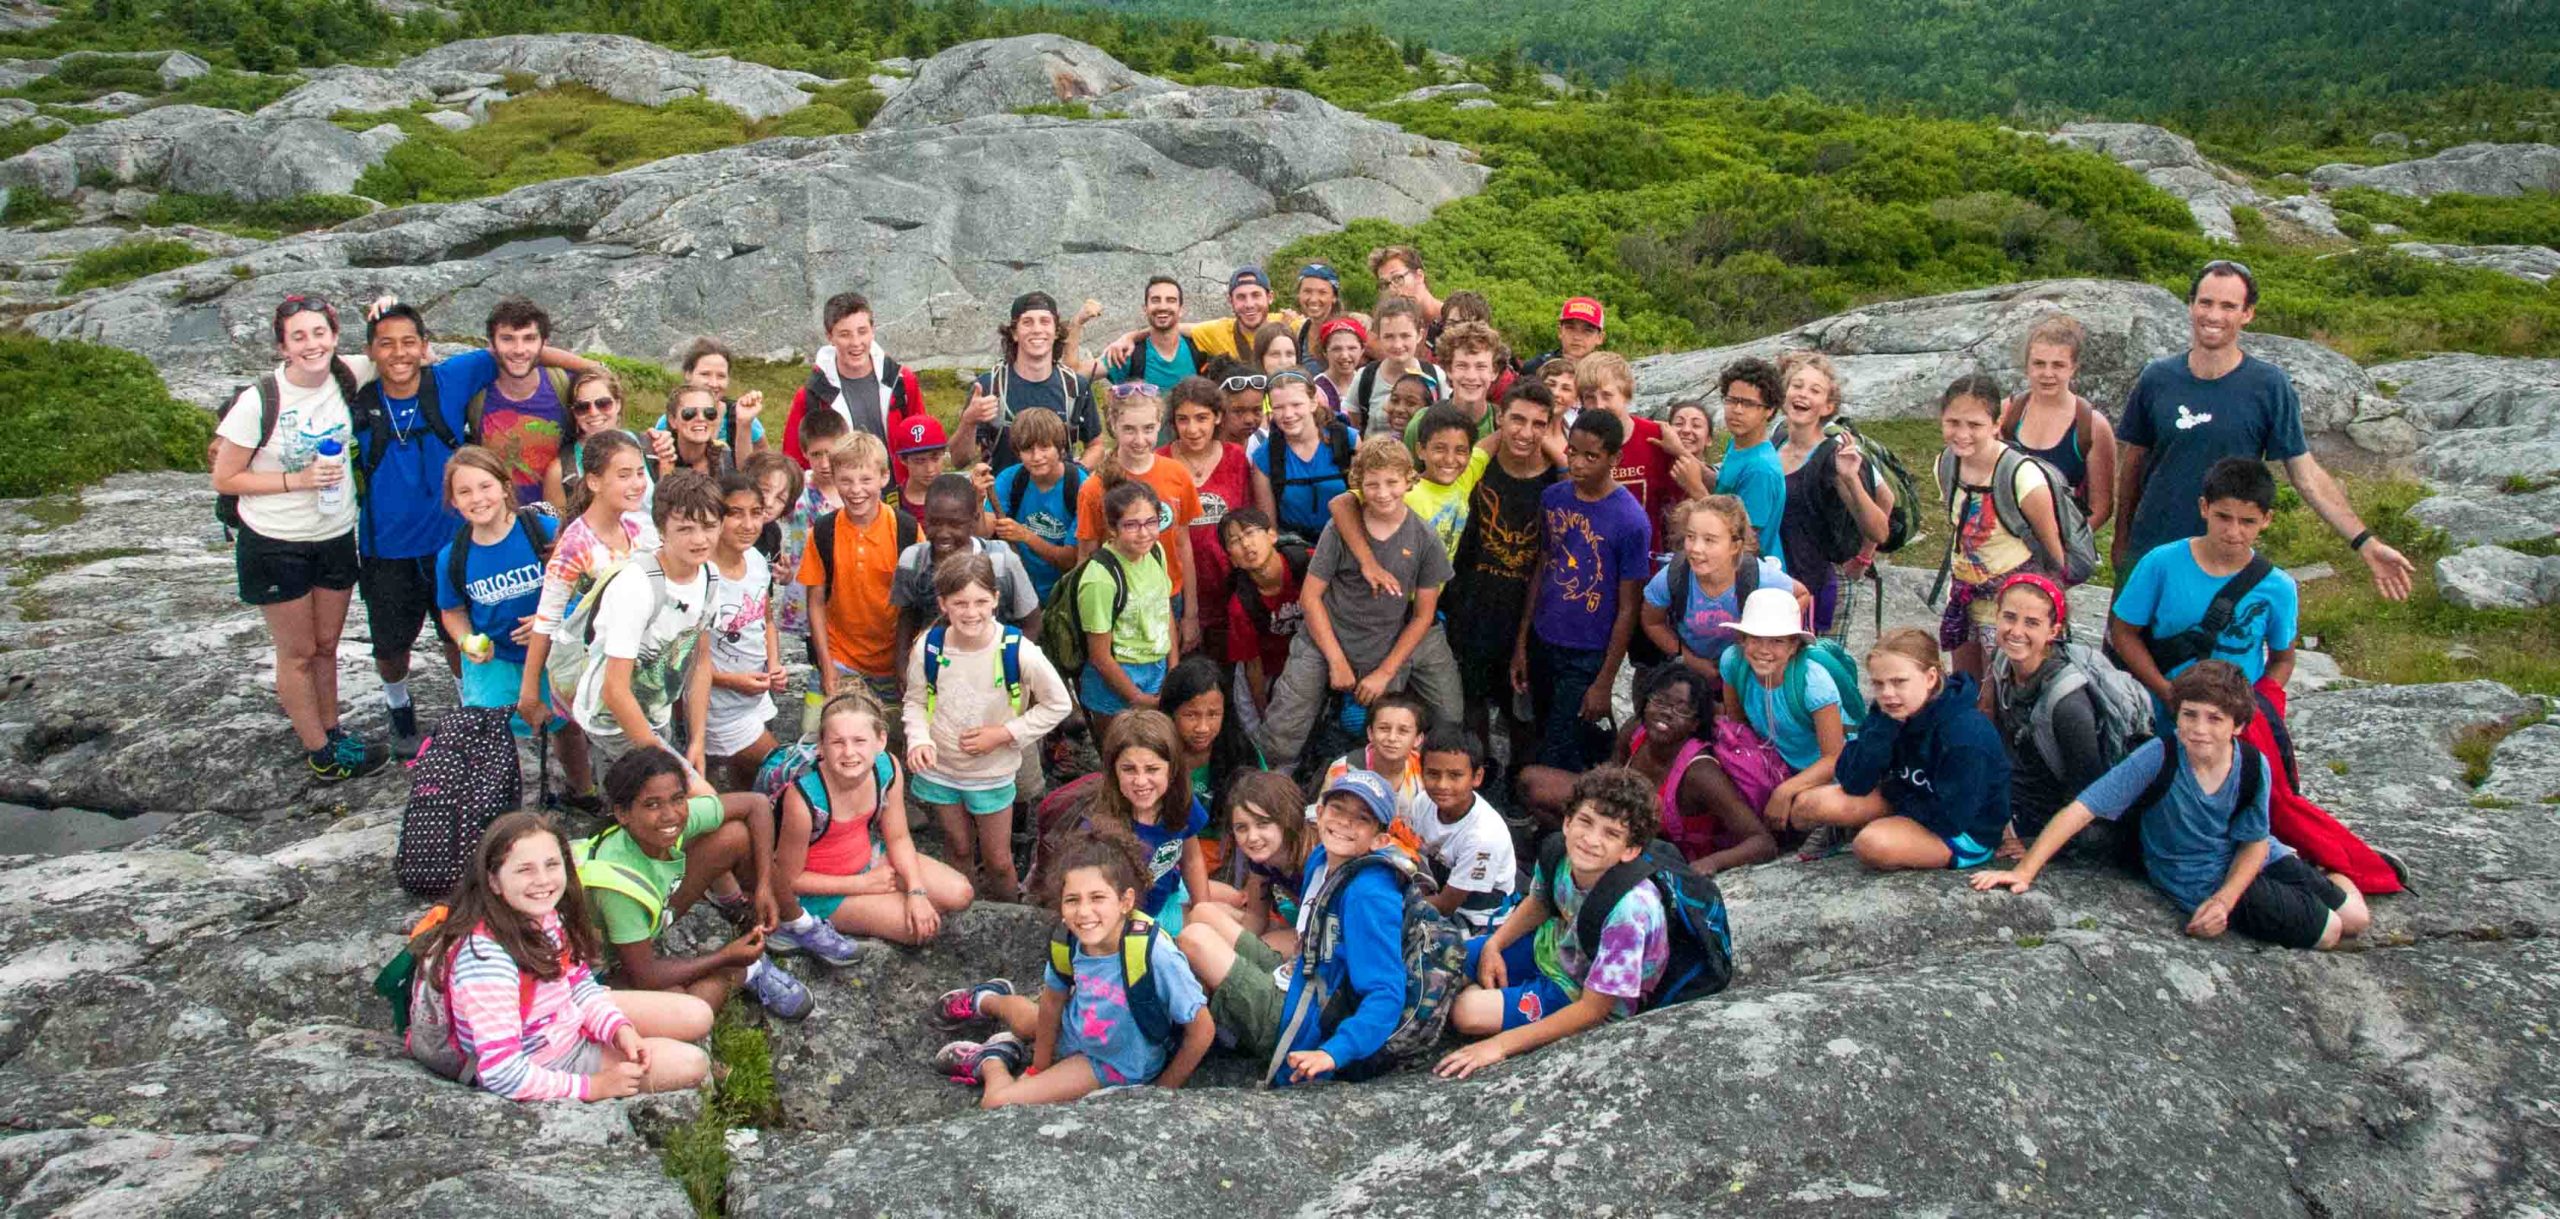 A large group of campers smiling at the camera on a hike on top of a mountain.